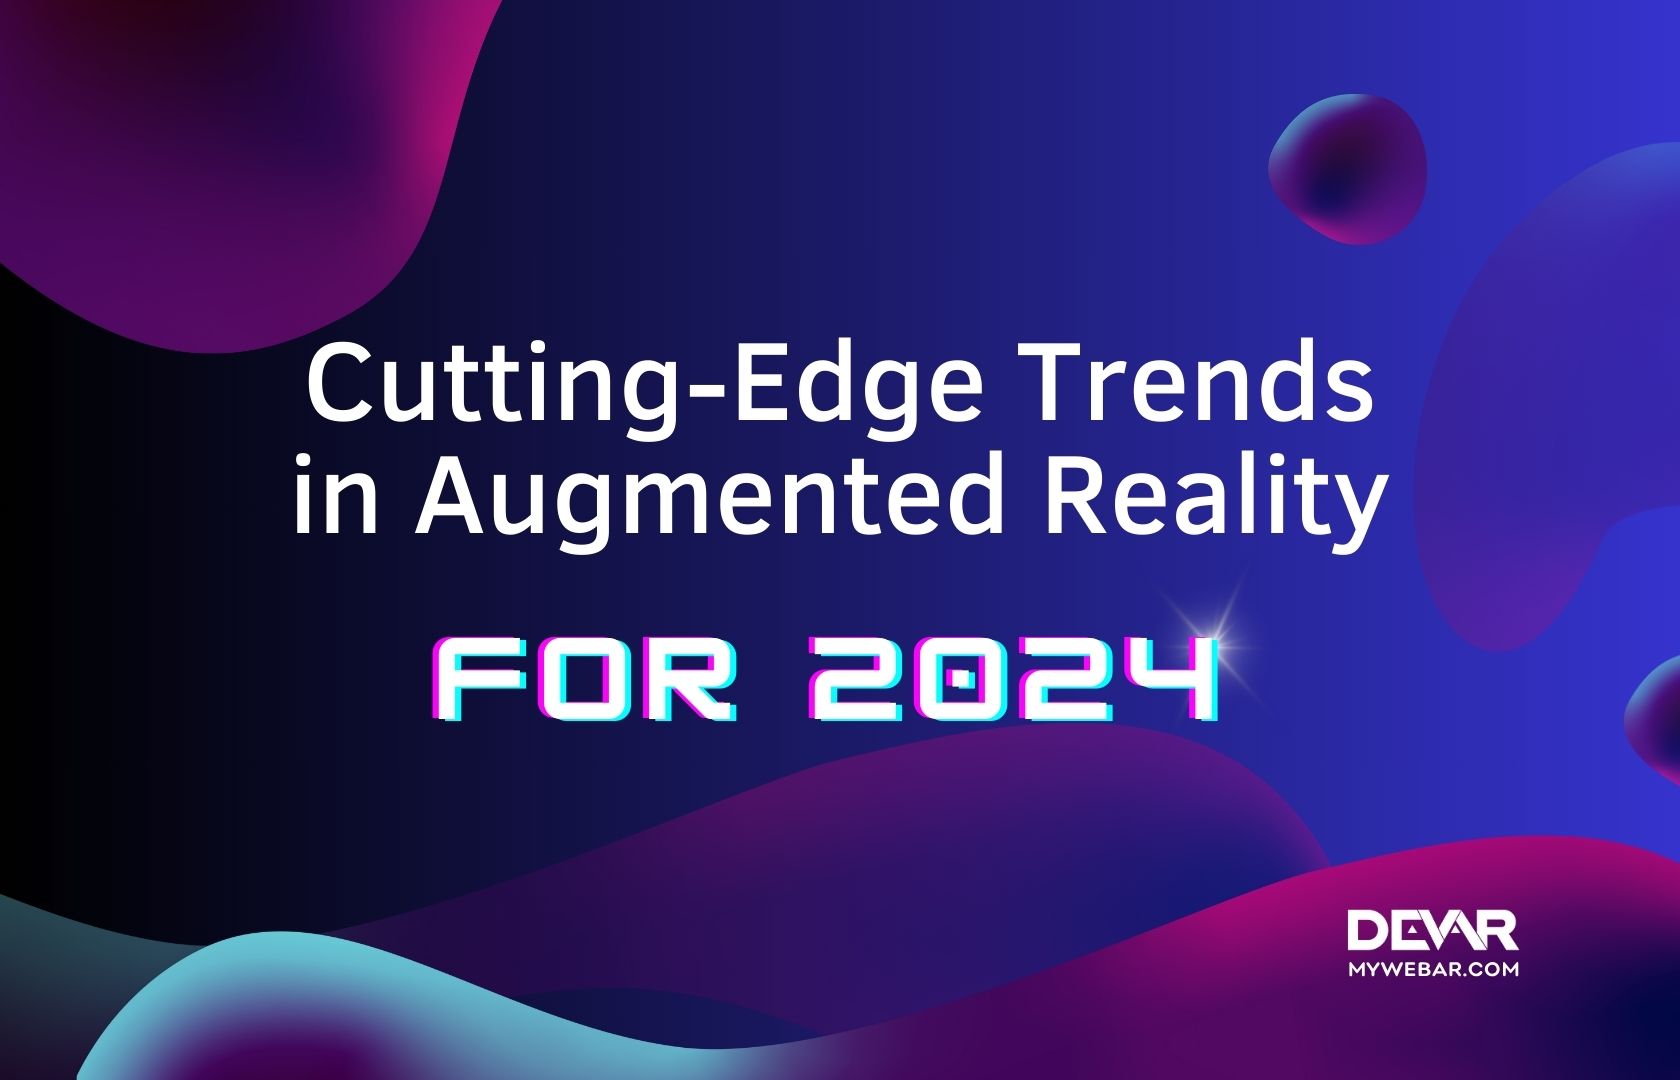 Trends in Augmented Reality for 2024